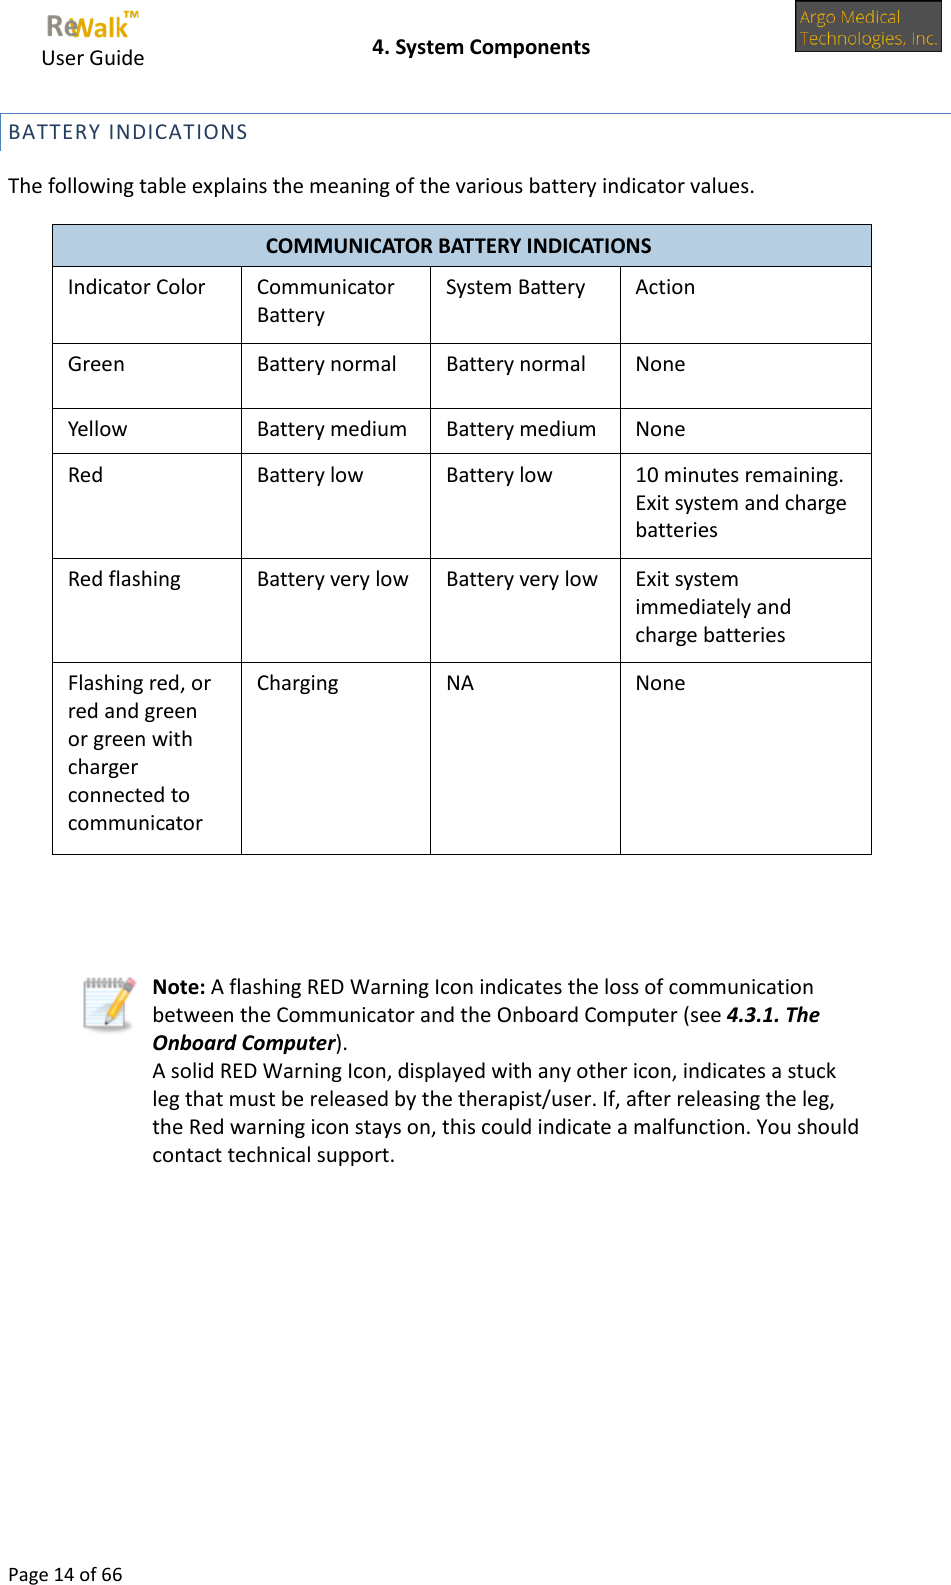     User Guide    4. System Components  Page 14 of 66  BATTERY INDICATIONS The following table explains the meaning of the various battery indicator values. COMMUNICATOR BATTERY INDICATIONS Indicator Color Communicator Battery System Battery Action Green Battery normal Battery normal None Yellow Battery medium Battery medium None Red Battery low Battery low 10 minutes remaining. Exit system and charge batteries Red flashing Battery very low Battery very low Exit system immediately and charge batteries Flashing red, or red and green or green with charger connected to communicator Charging NA None    Note: A flashing RED Warning Icon indicates the loss of communication between the Communicator and the Onboard Computer (see 4.3.1. The Onboard Computer). A solid RED Warning Icon, displayed with any other icon, indicates a stuck leg that must be released by the therapist/user. If, after releasing the leg, the Red warning icon stays on, this could indicate a malfunction. You should contact technical support.        